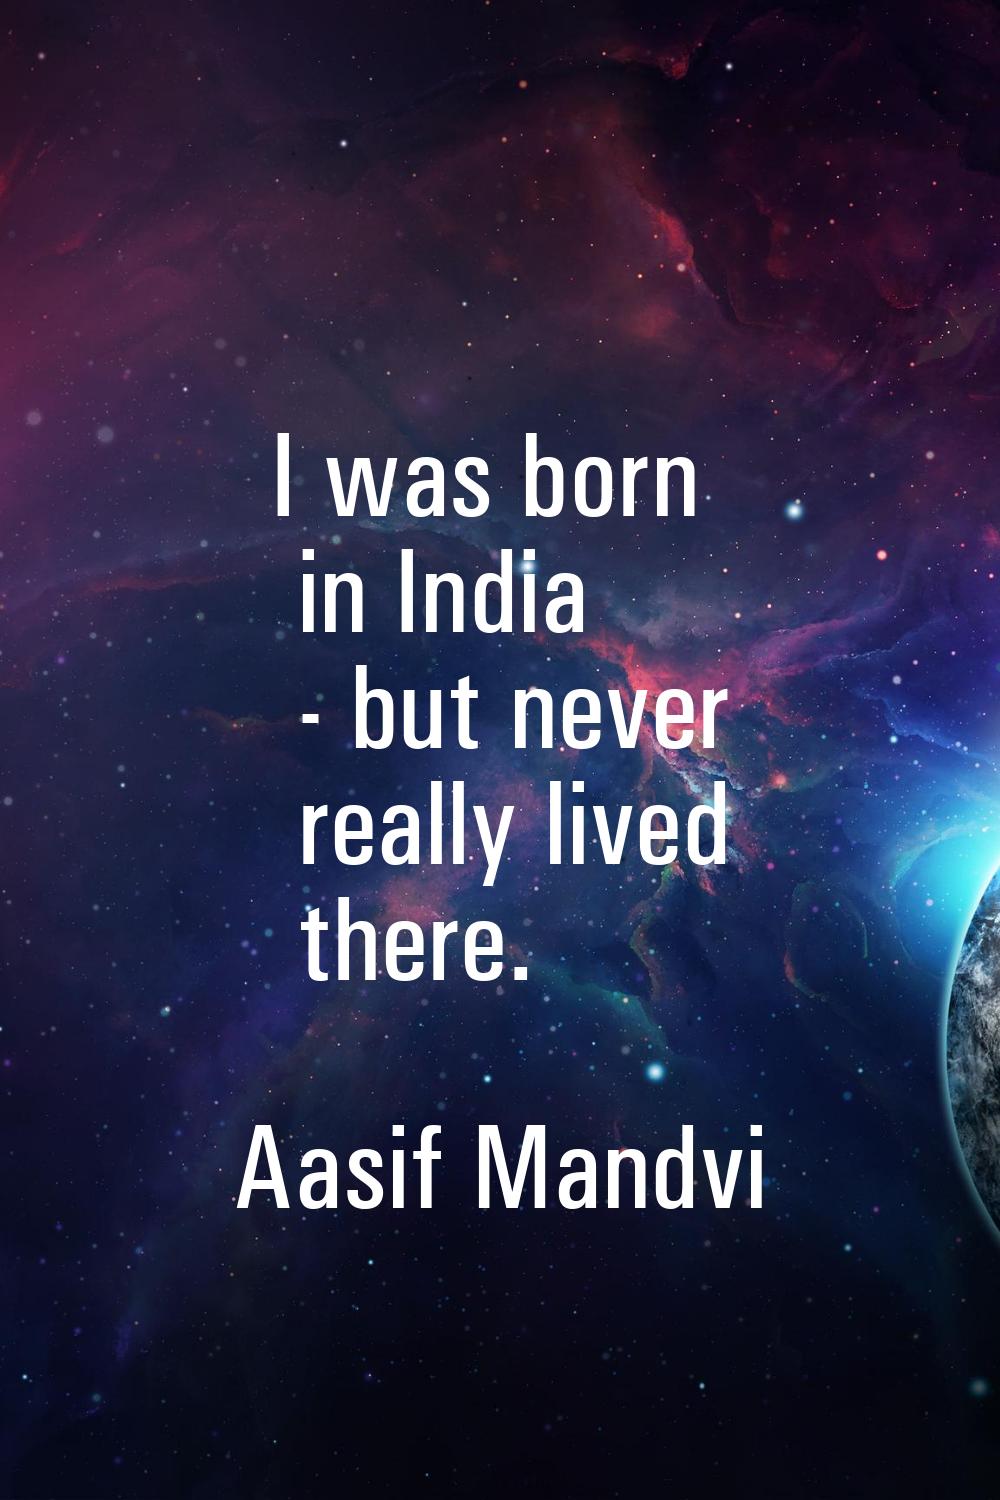 I was born in India - but never really lived there.